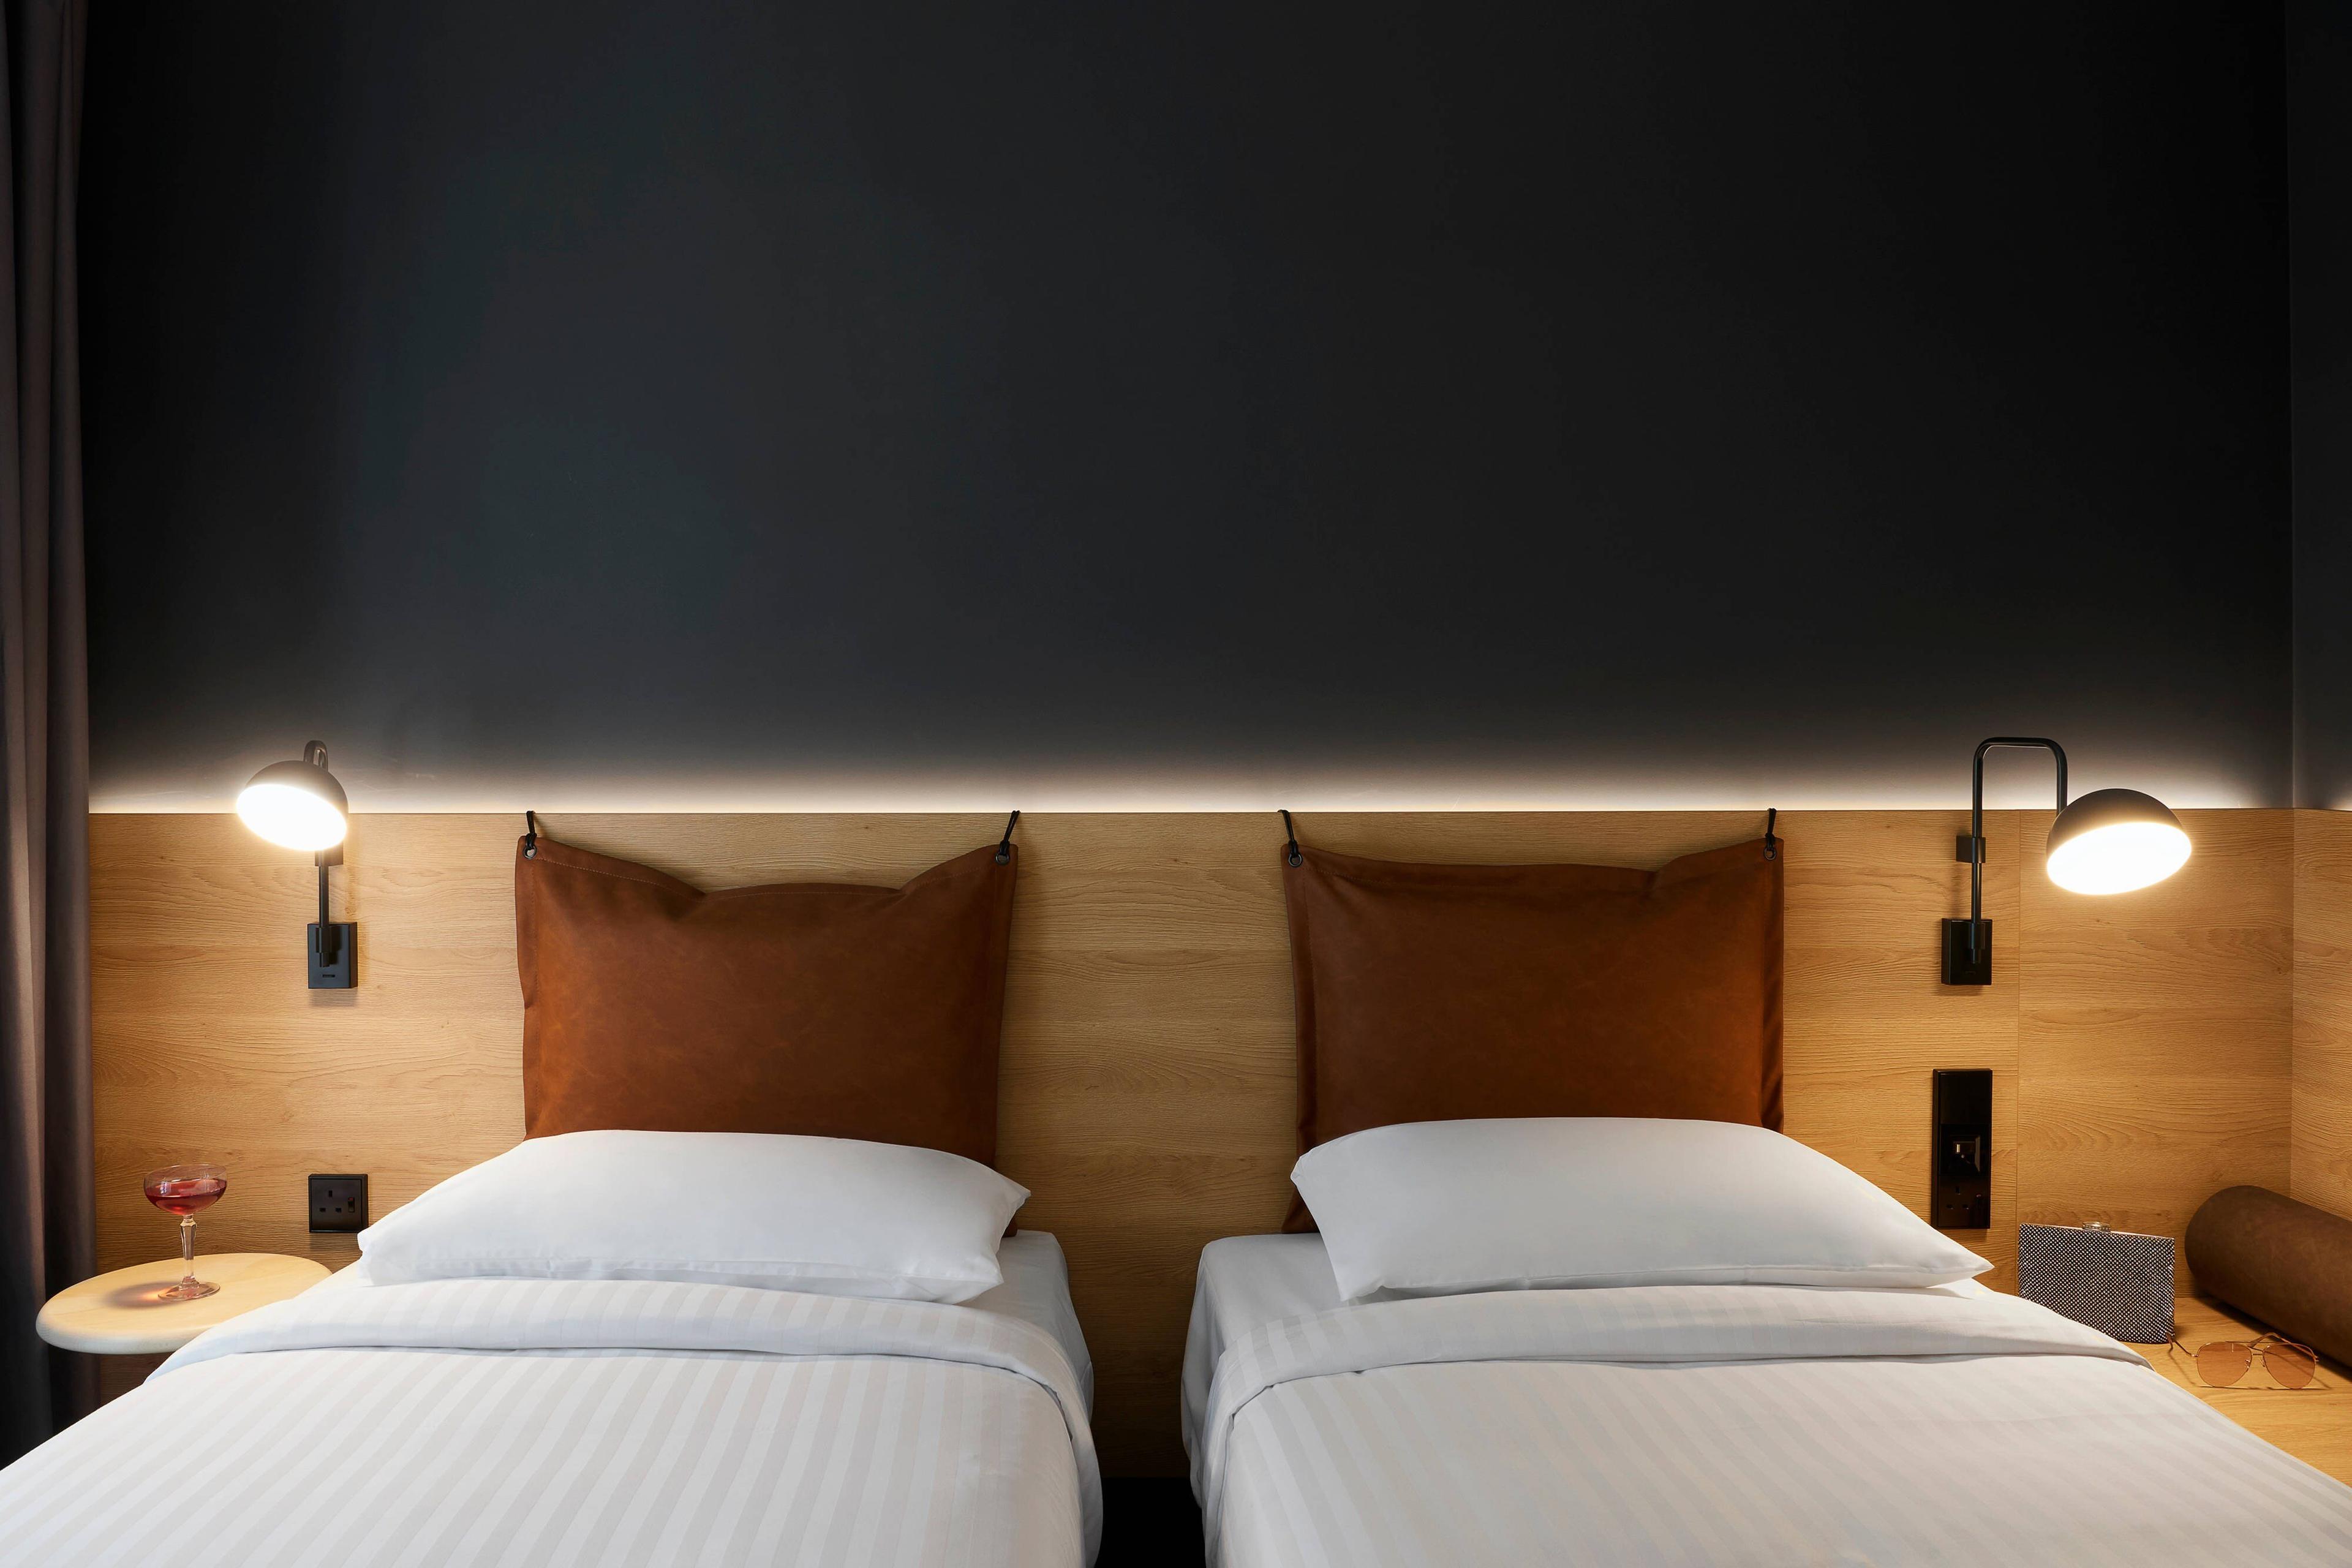 win up, with no bottom-bunk - at Moxy, we always say, it's not the size of the room that matters, it’s how you use it!